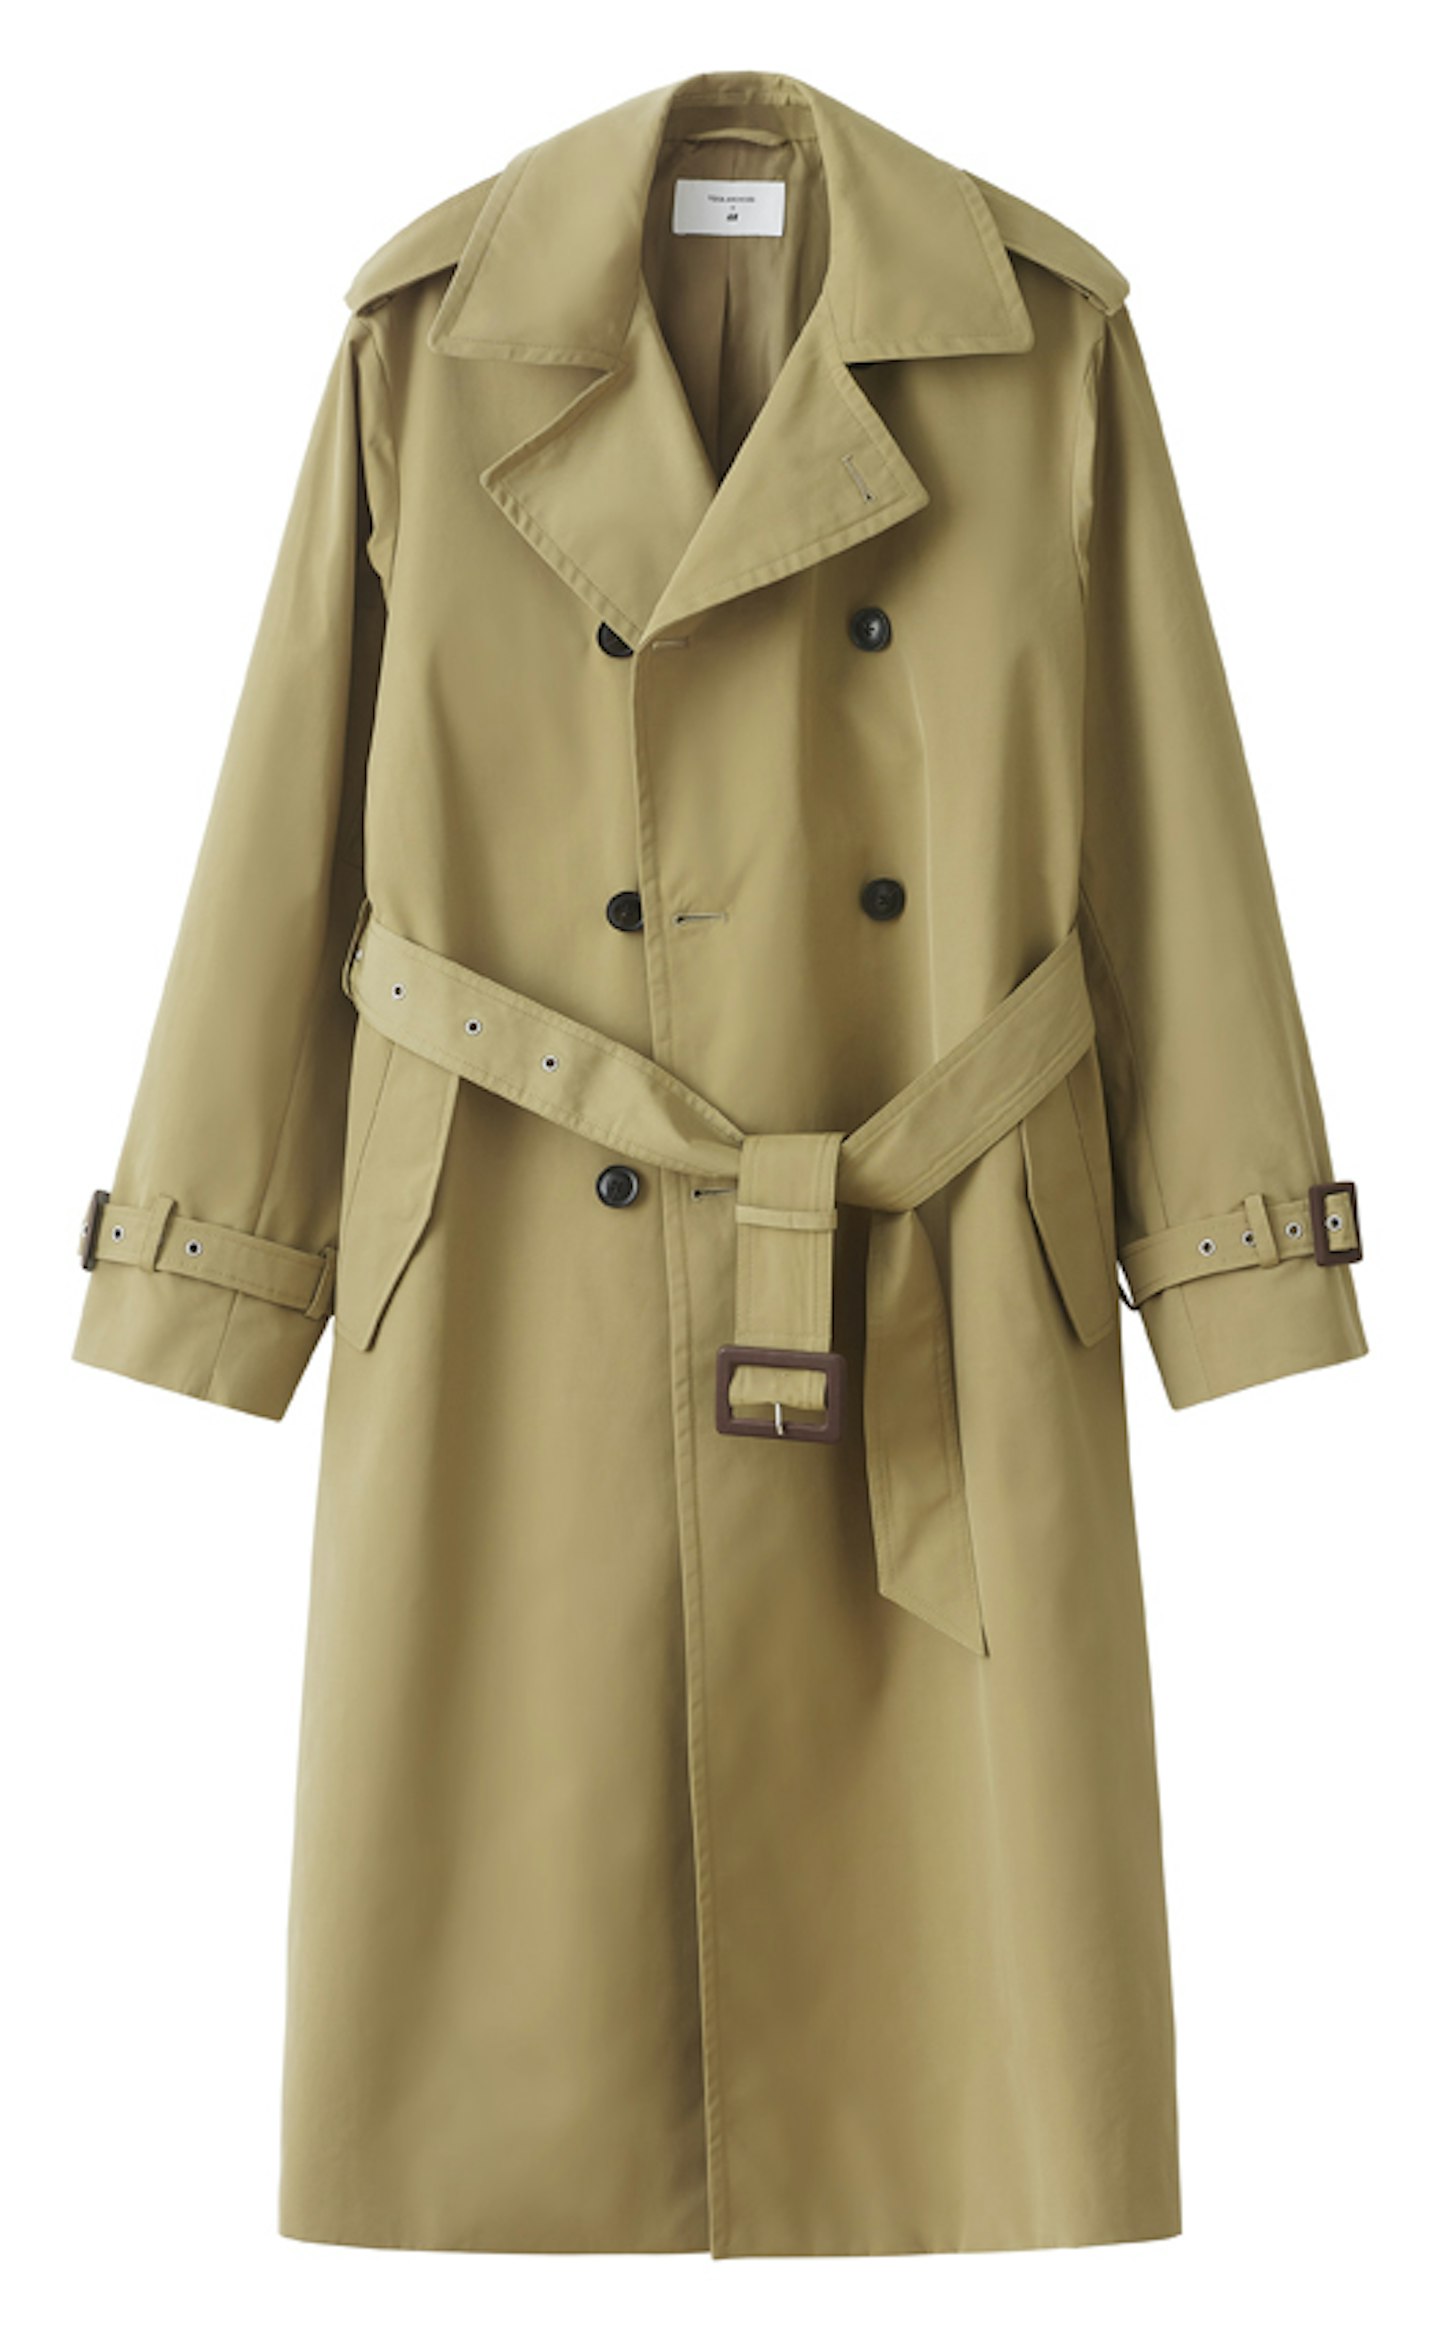 TOGA ARCHIVES x H&M, Trench Coat, £149.99